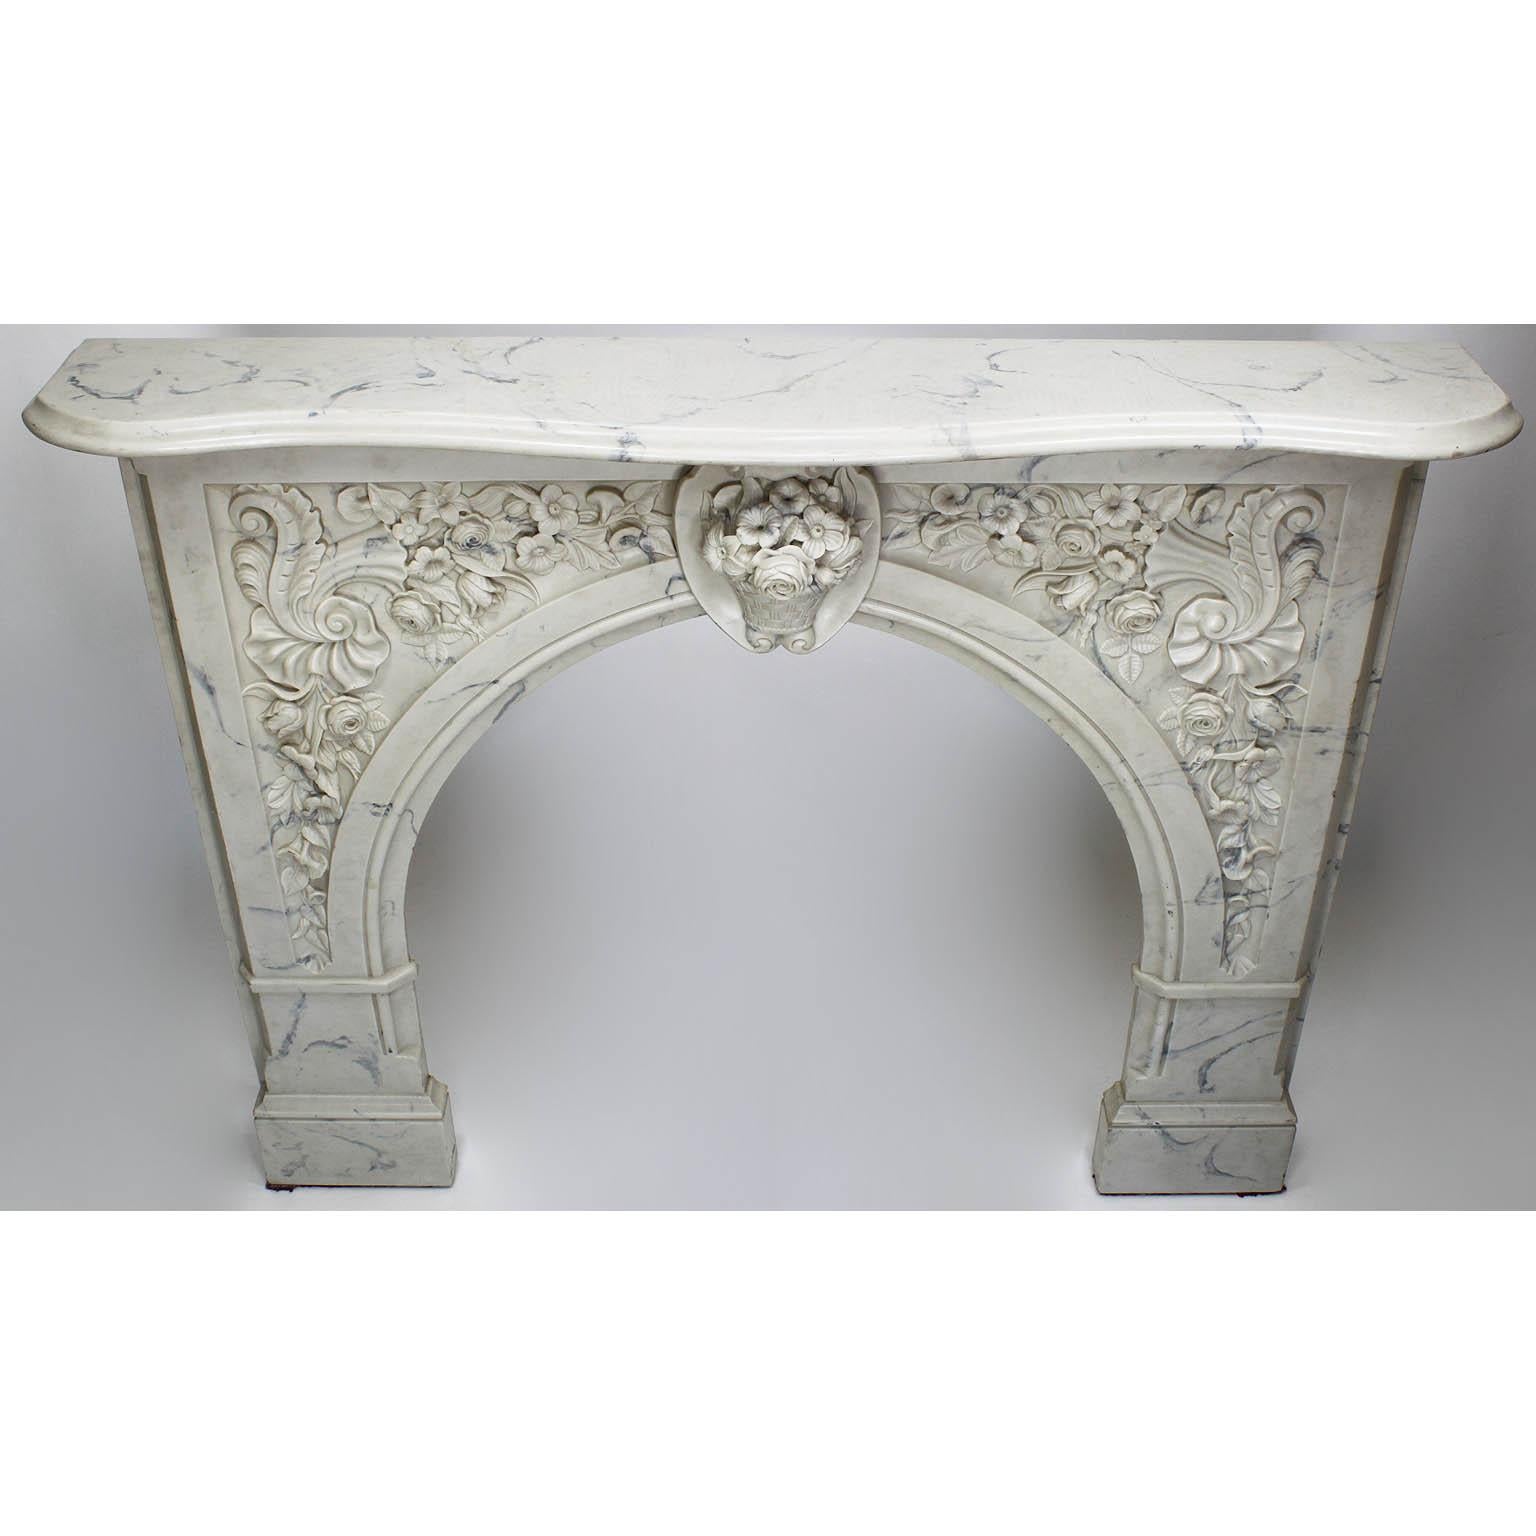 A Louis XV style white and veined Carrara color cultured cast-marble fireplace mantel. The ornately detailed mantel centered with a basket of flowers flanked by floral and shell themes, circa 20th century.

Measures: Shelf width 59 inches (149.9